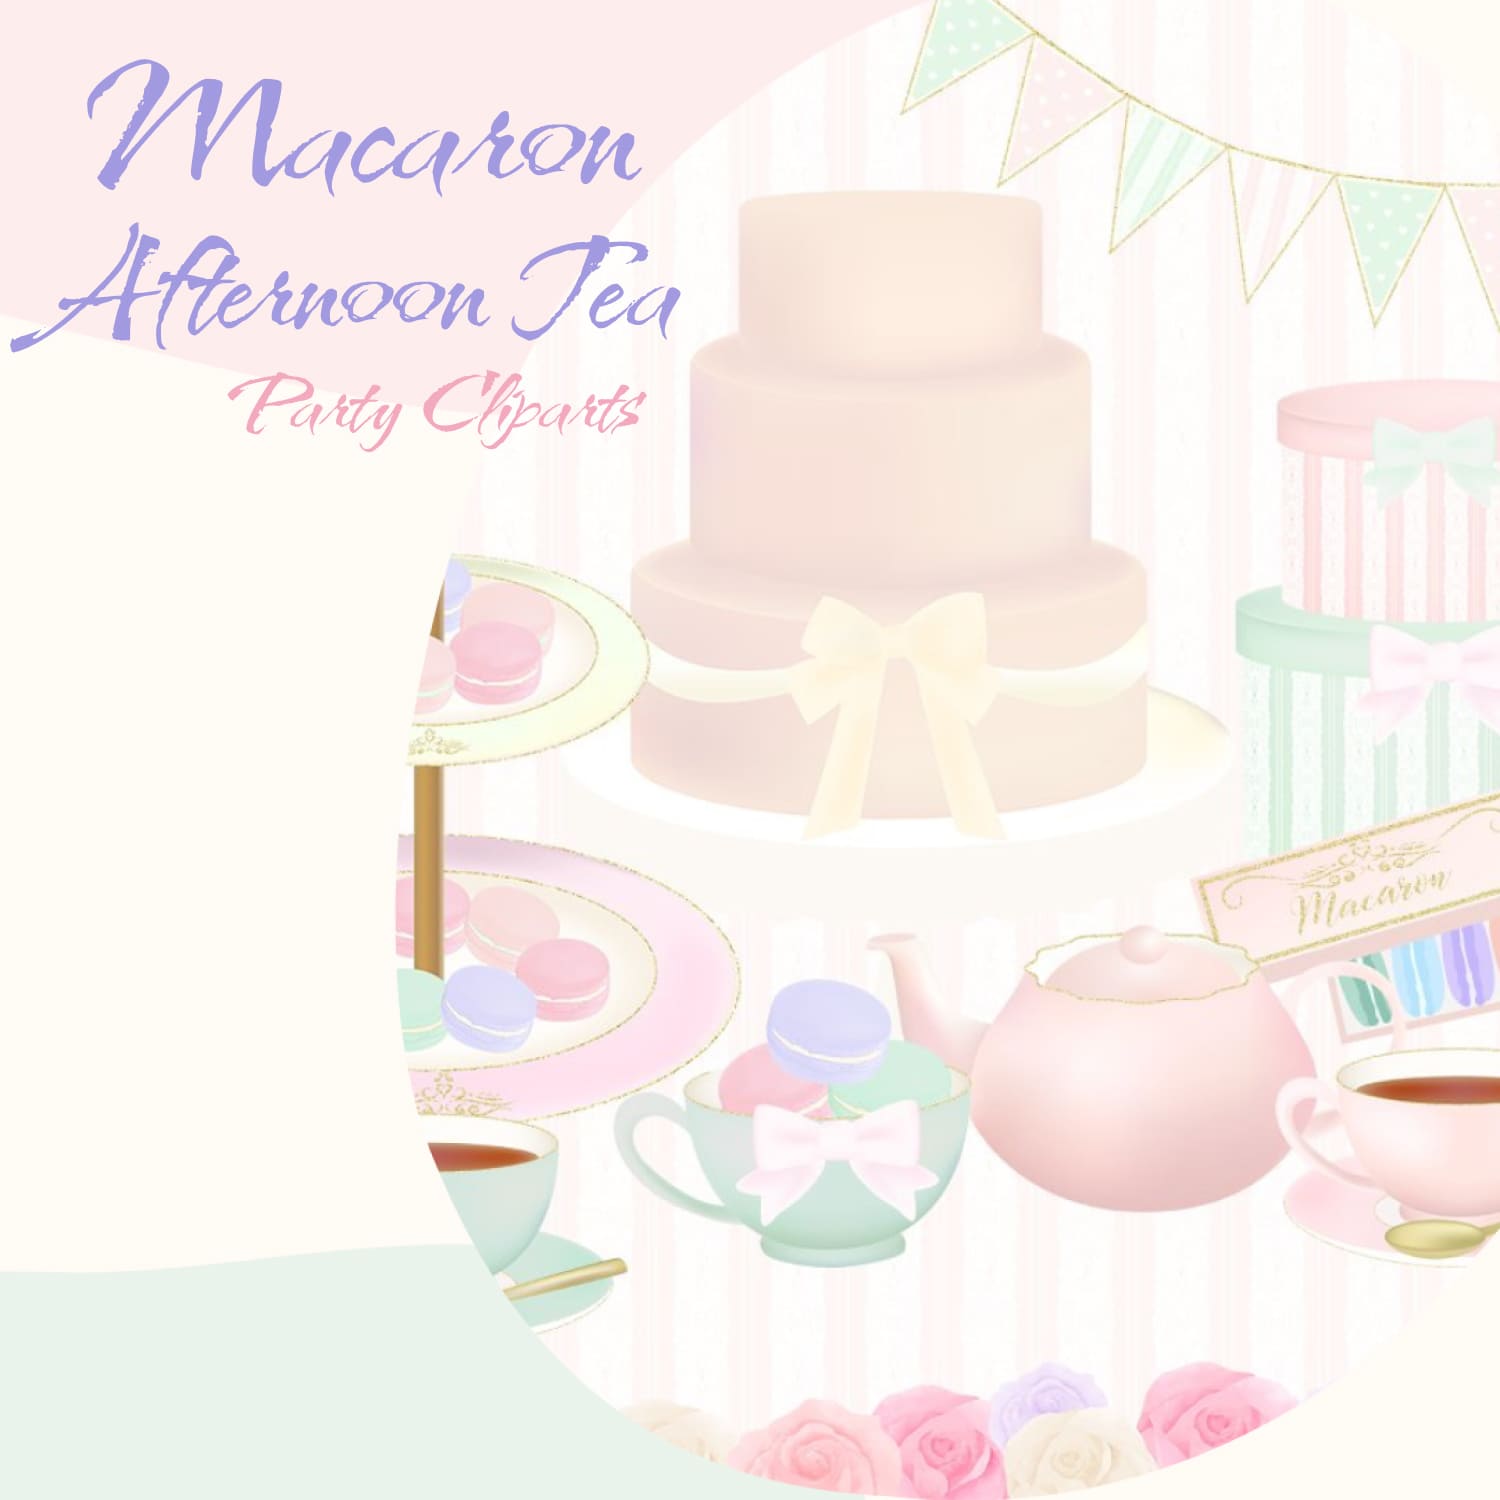 Macaron Afternoon Tea Party Cliparts.